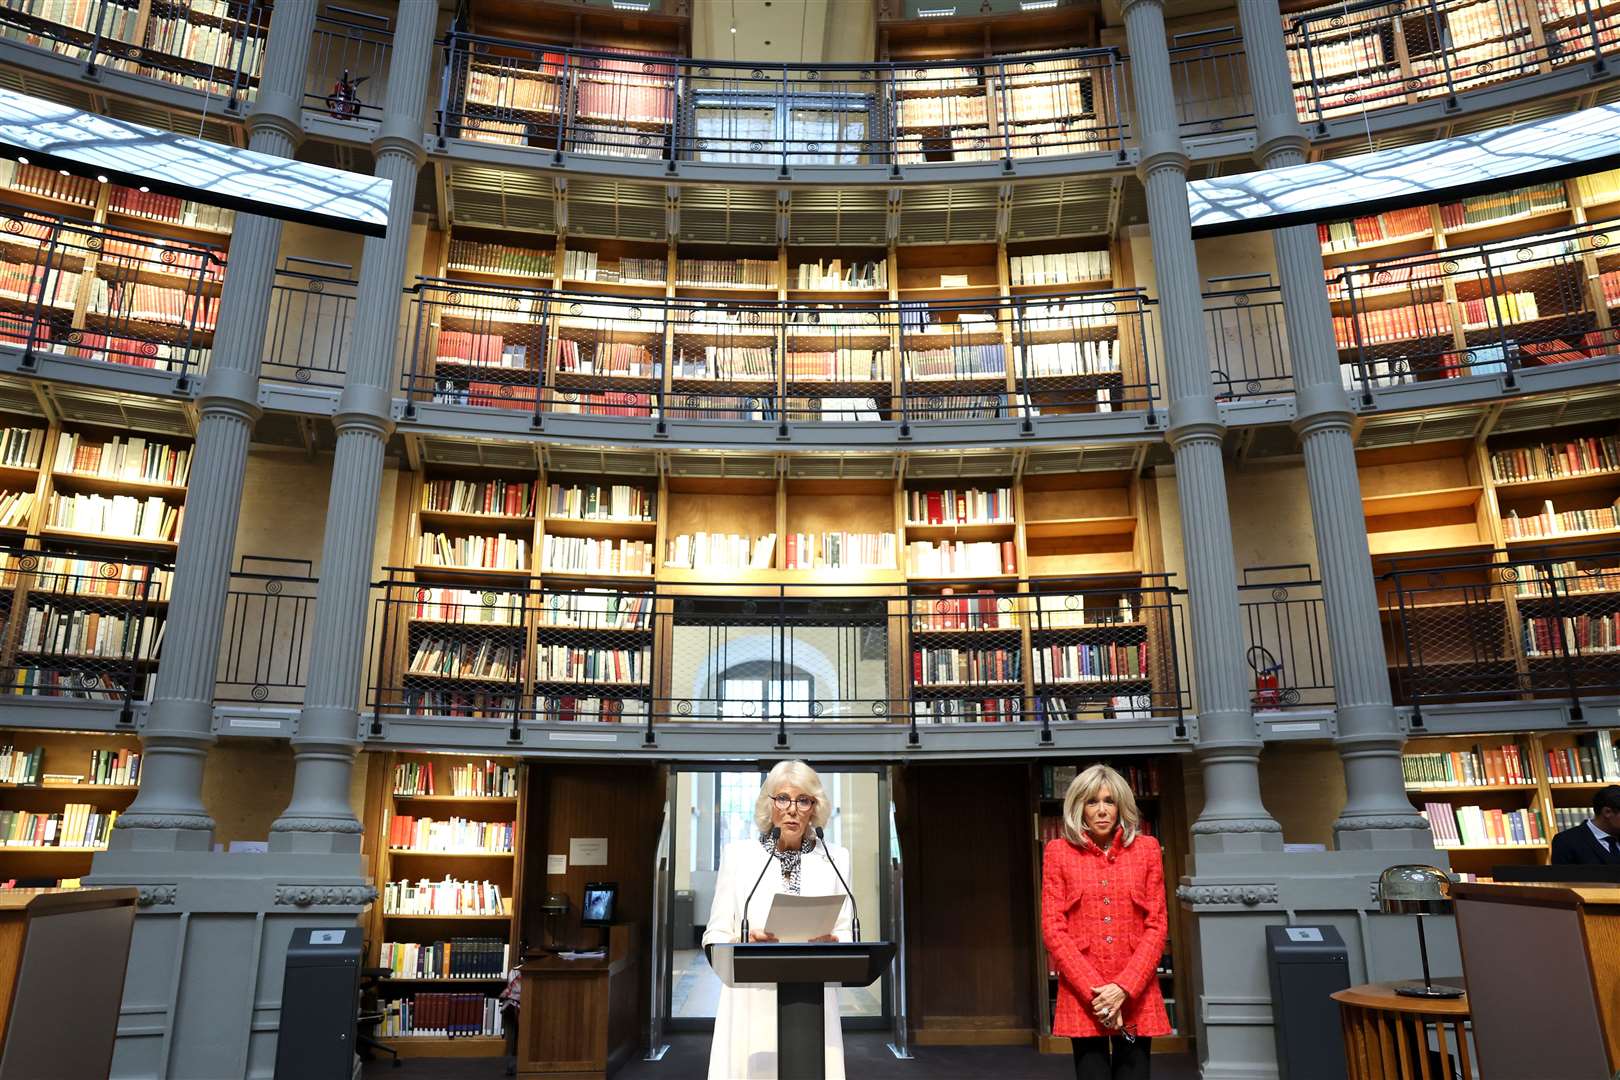 Queen Camilla makes a speech during her visit to the Bibliotheque nationale de France in Paris (Chris Jackson/PA)